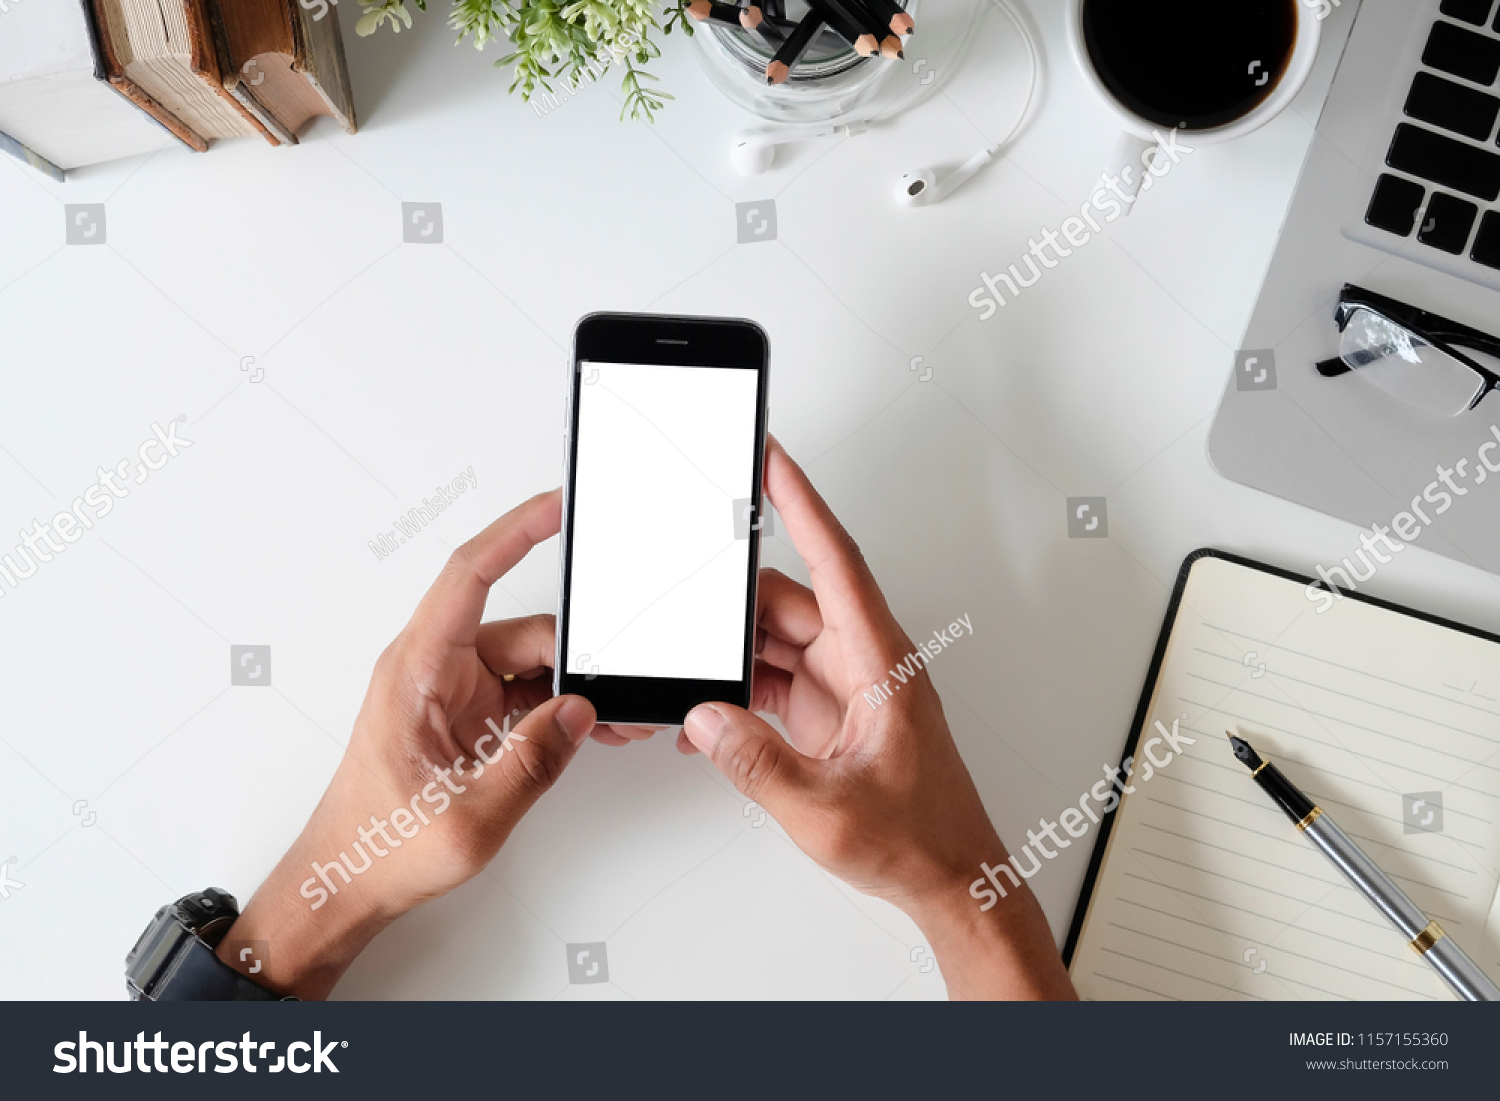 Top view office desk with mockup smartphone on hands with empty display screen. #1157155360